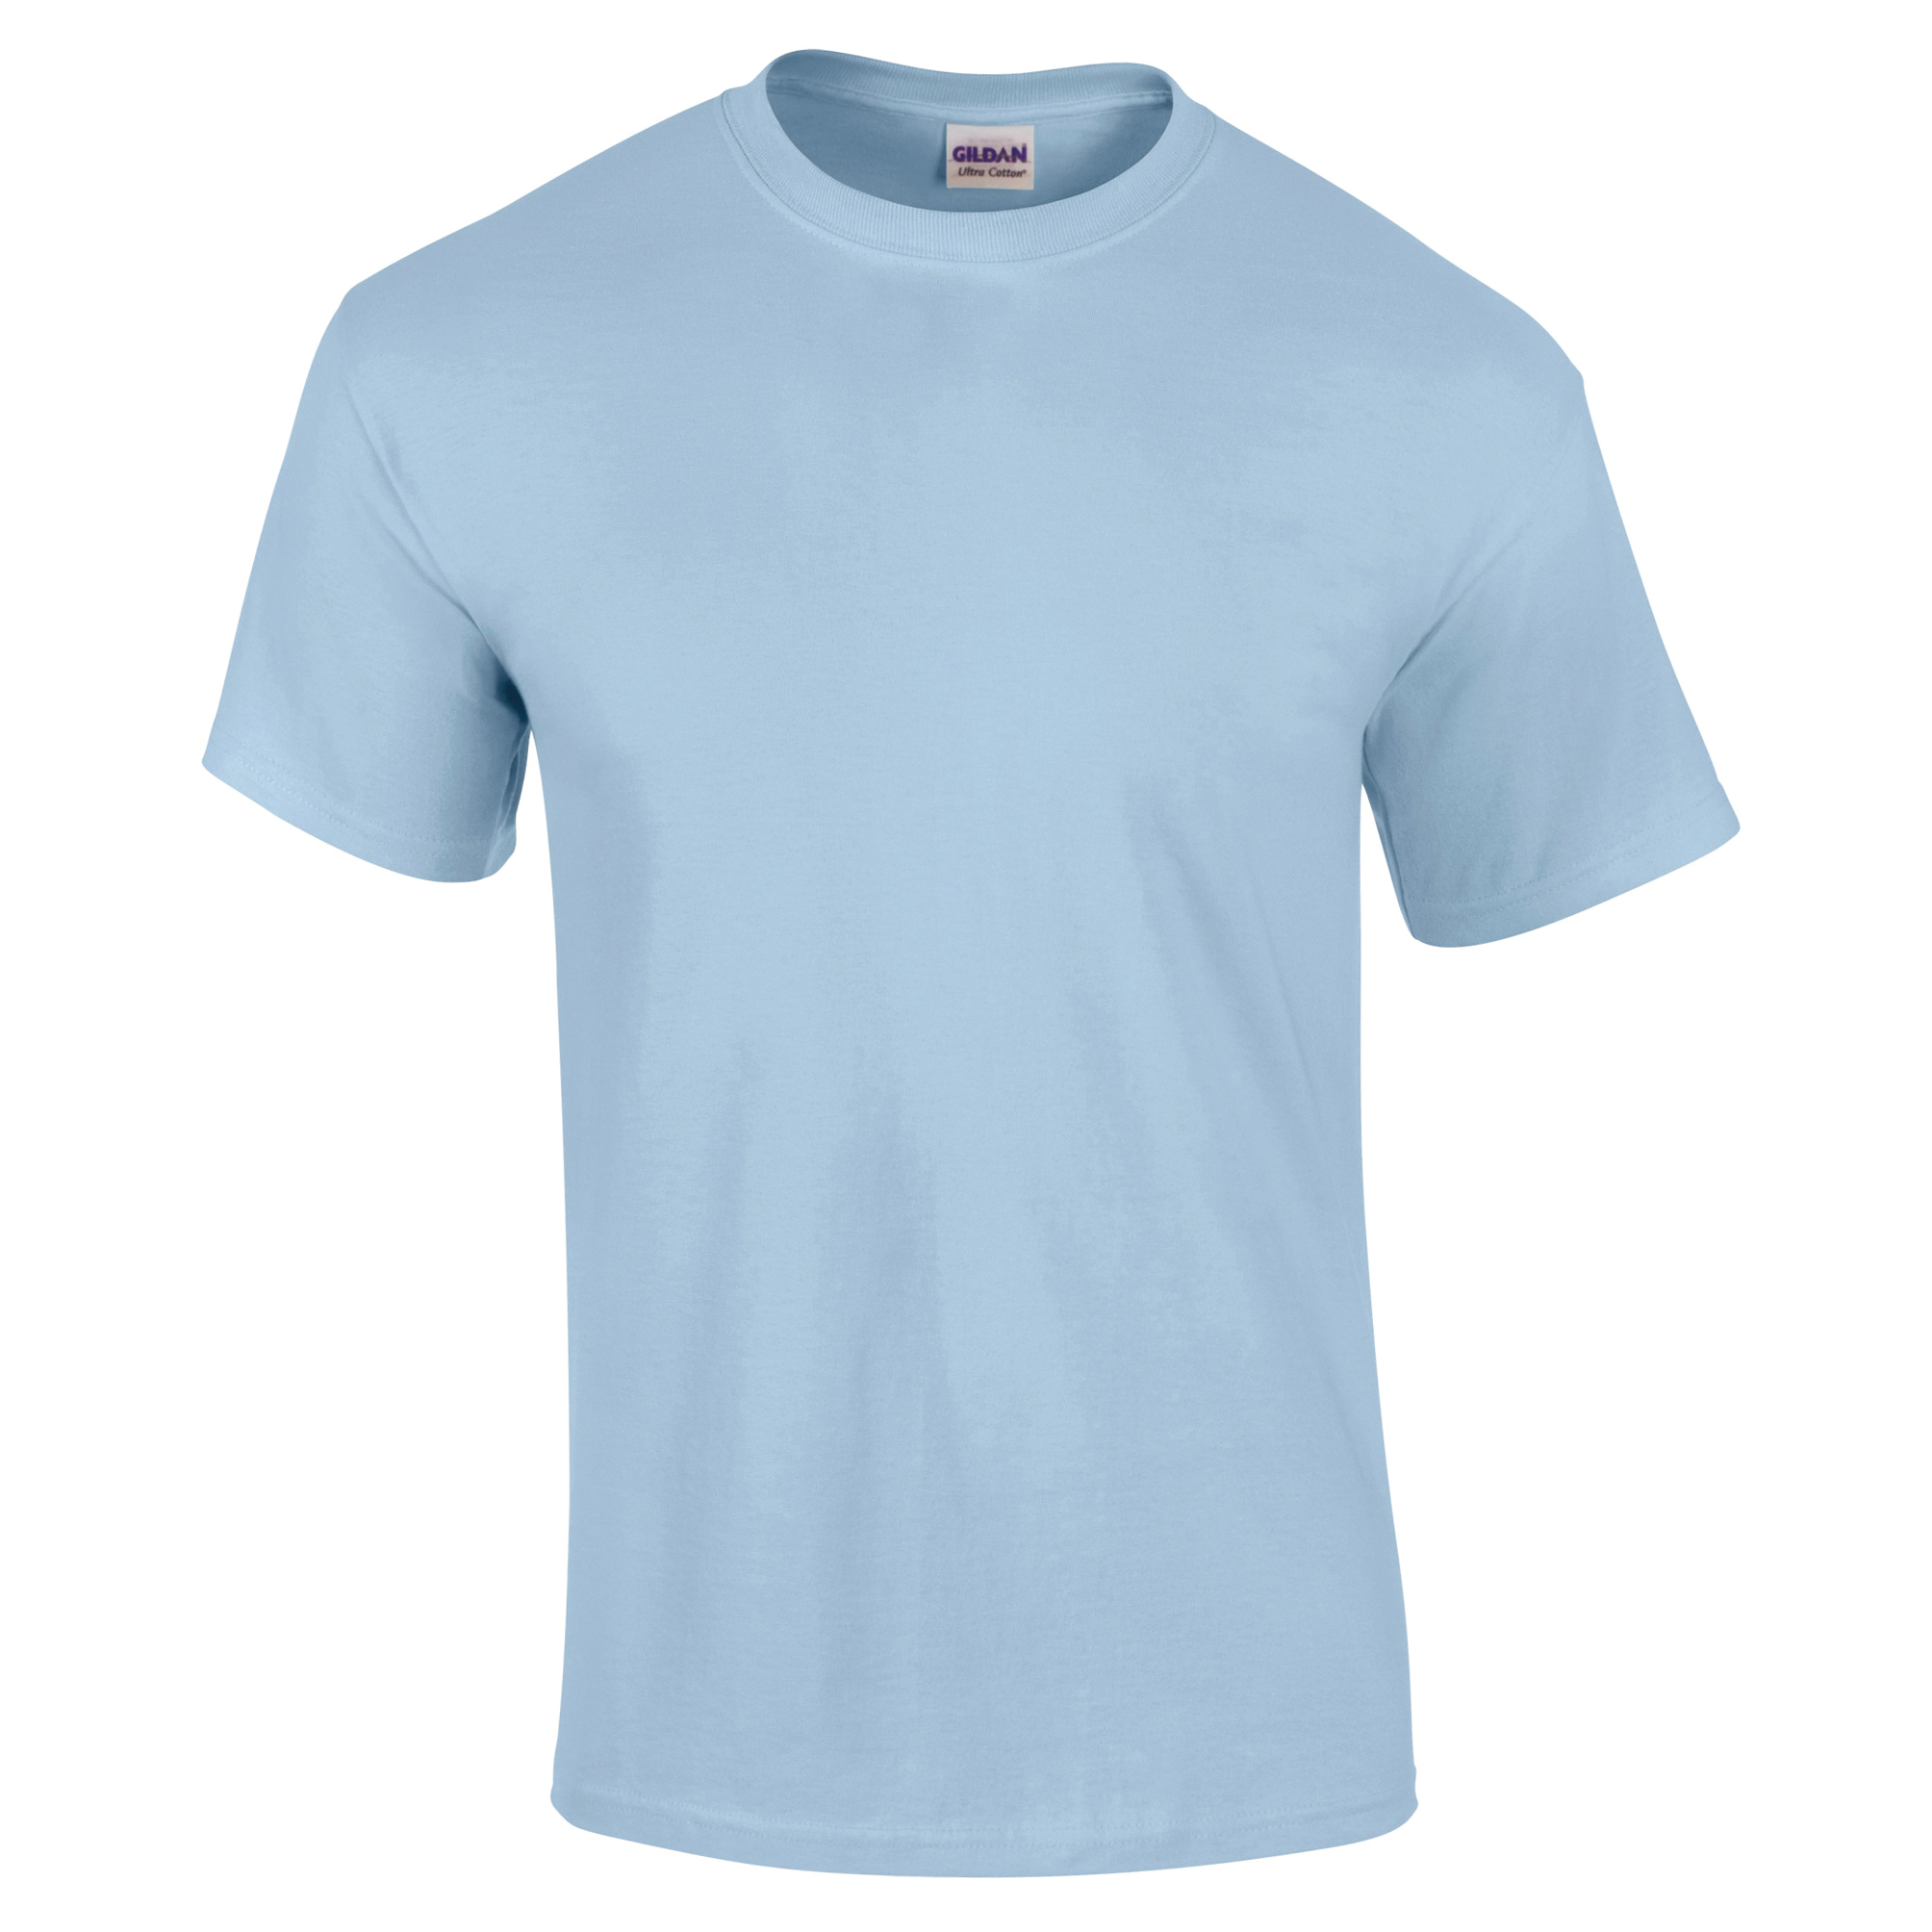 ax-httpswebsystems.s3.amazonaws.comtmp_for_downloadultra-cotton-light-blue.jpg